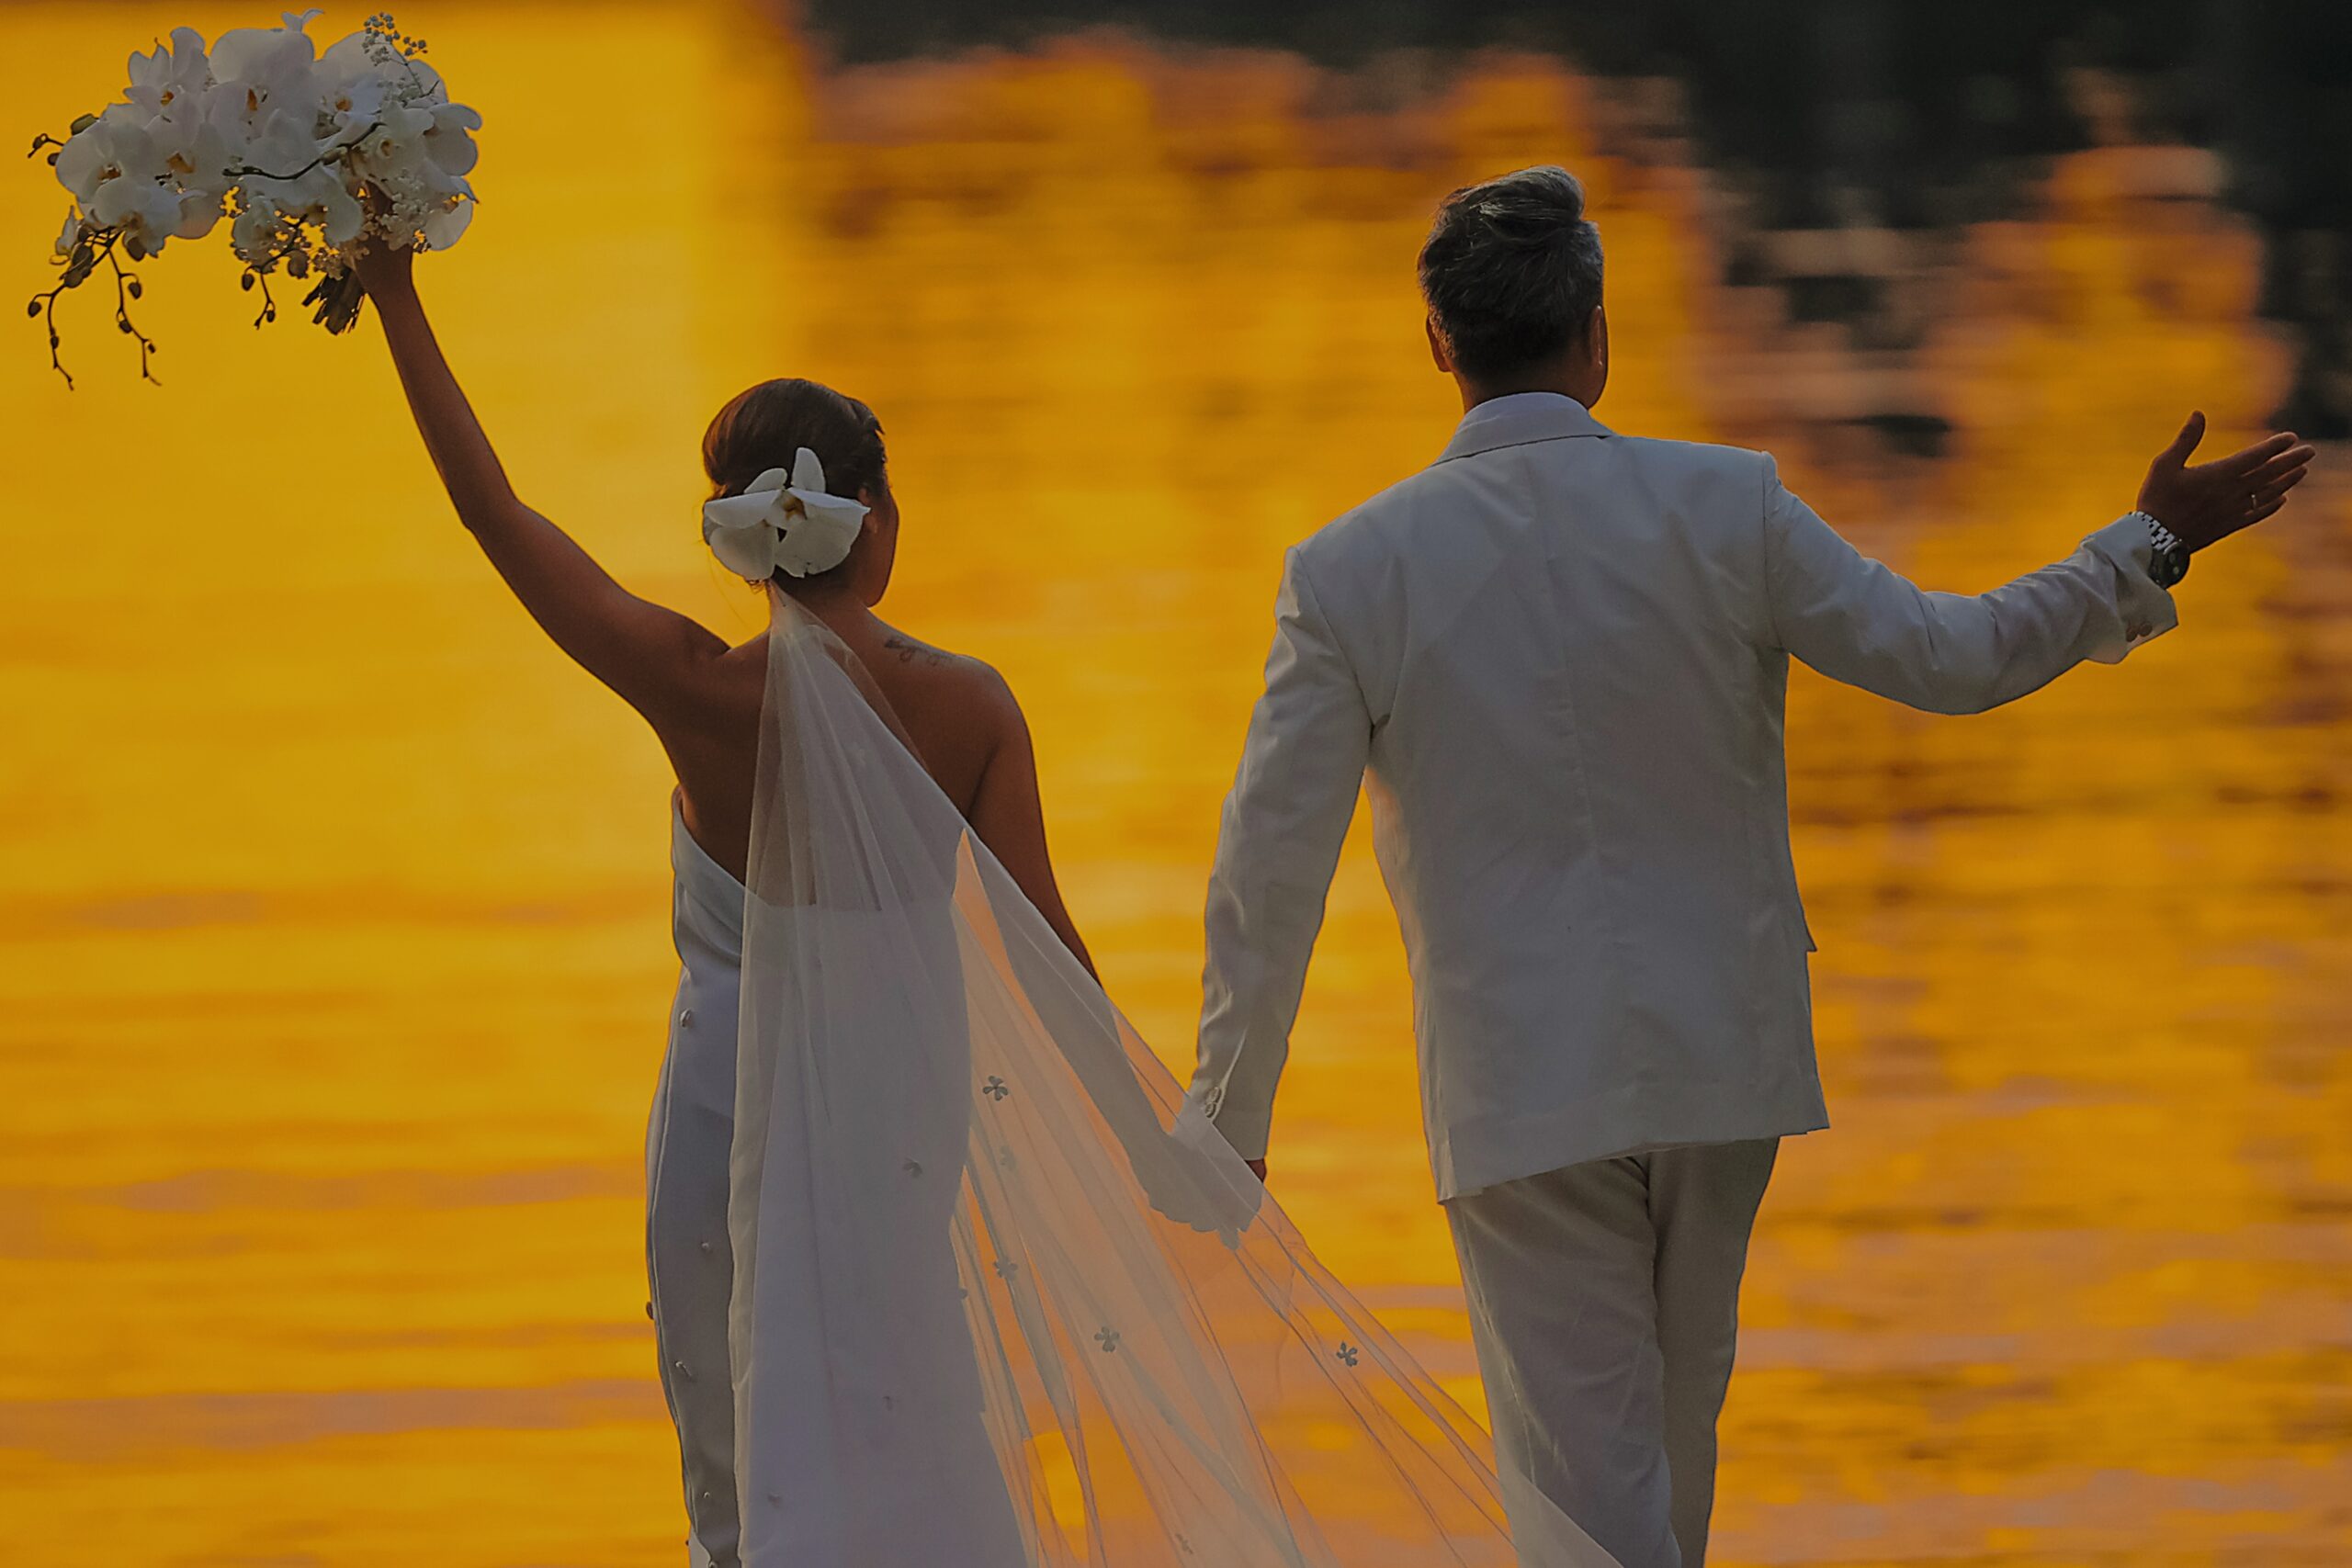 A magical sunset greets the newlyweds on their special day